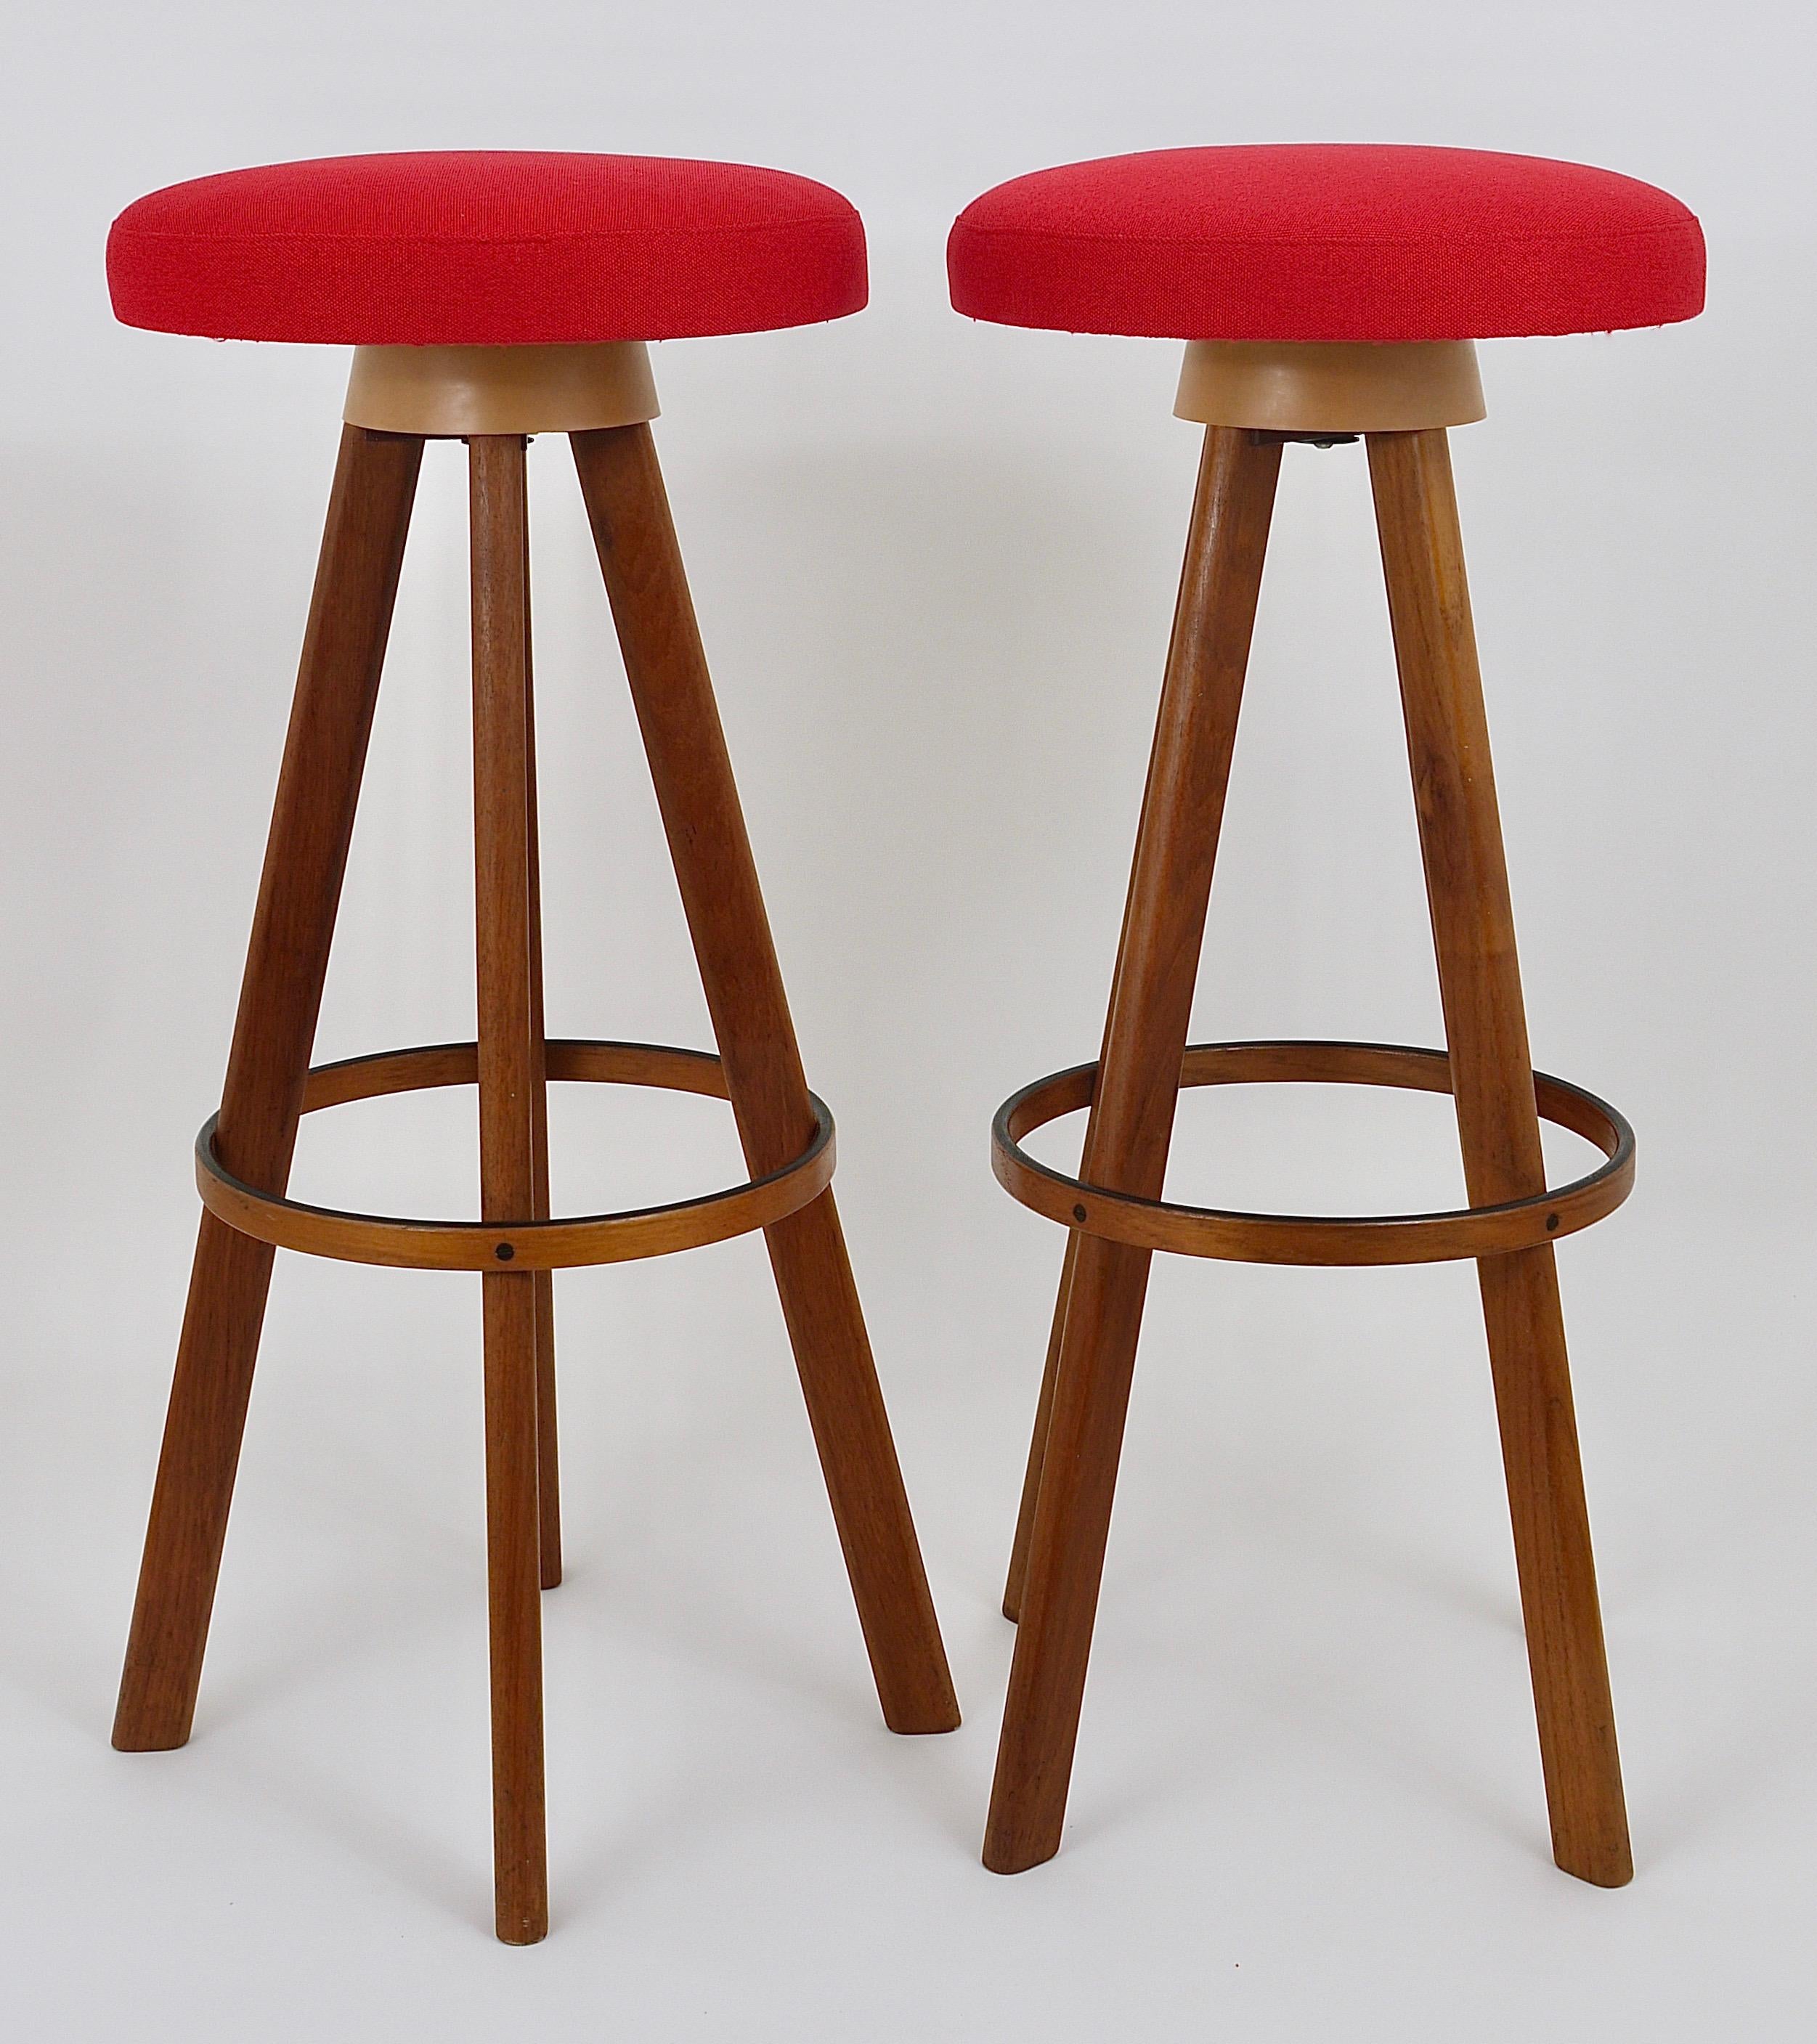 Up to two identical Danish midcentury barstools or counter stools, designed in the 1960s by Hans Olsen executed by Frem Rojle in Denmark. These great looking stools are made of solid teakwood. The swiveling round seats have a red fabric upholstery.